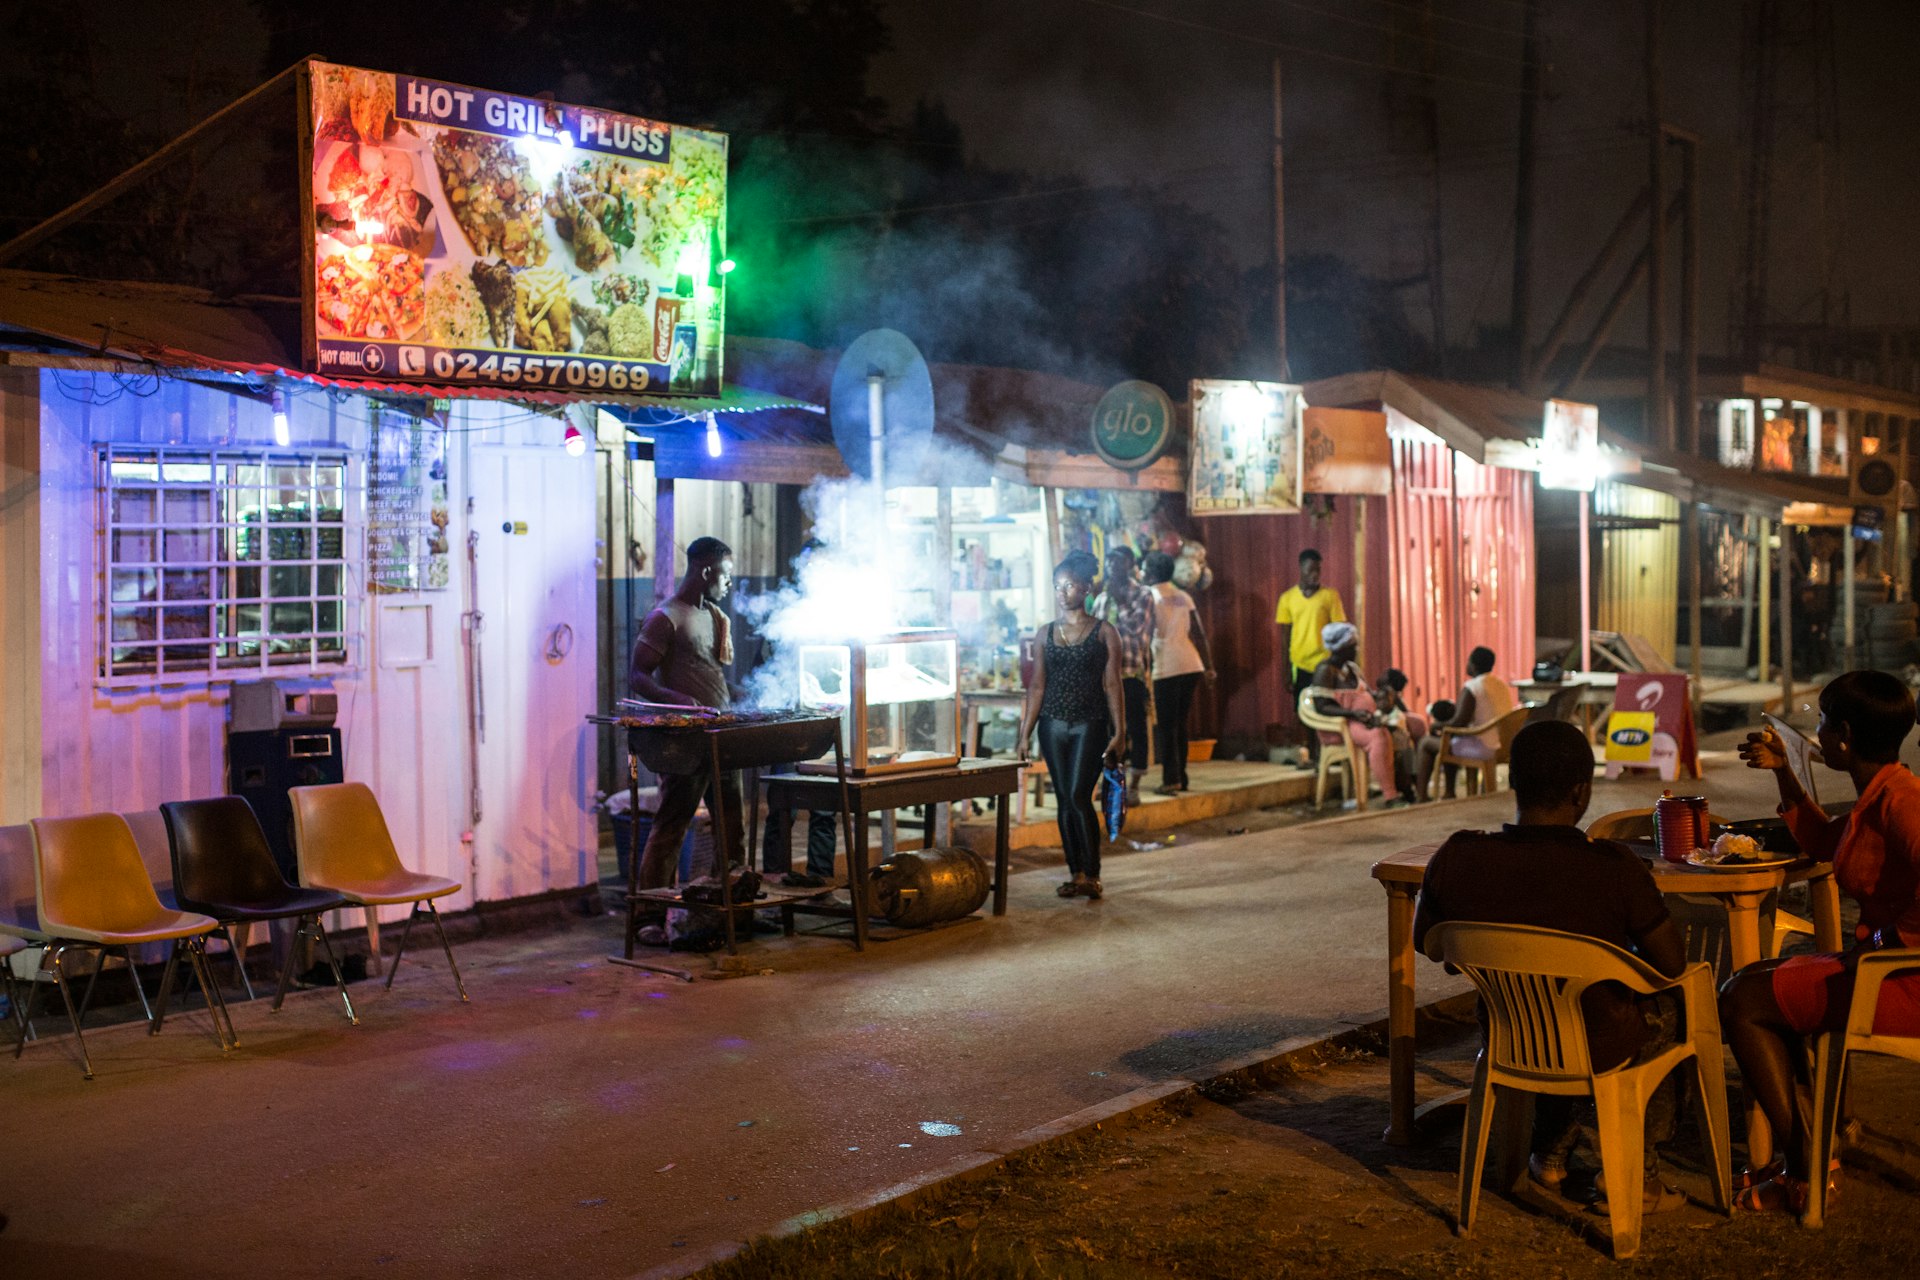 People enjoy food and drinks at roadside bars and restaurants on a car-free street at night in Accra, Ghana, West Africa